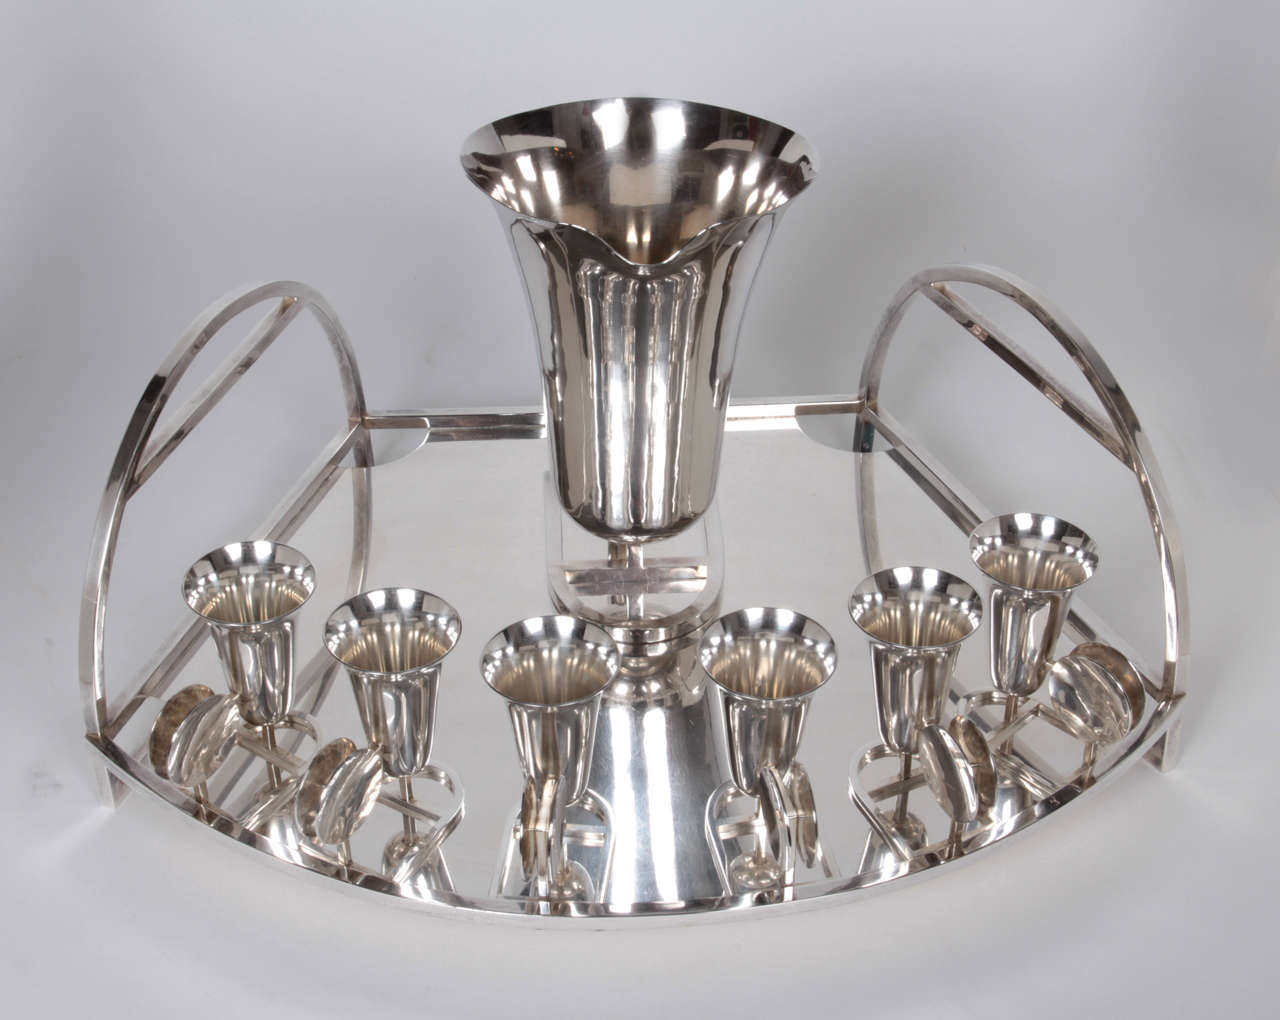 WILLIAM FREDERICK (1921-2012) Chicago (USA) 

Unique Modernist Cocktail/Cordial drinks set
 circa 1945-1950 

Hand-wrought sterling silver complete serving set comprising a pitcher with handle, six glasses/cordials with handles and an arching